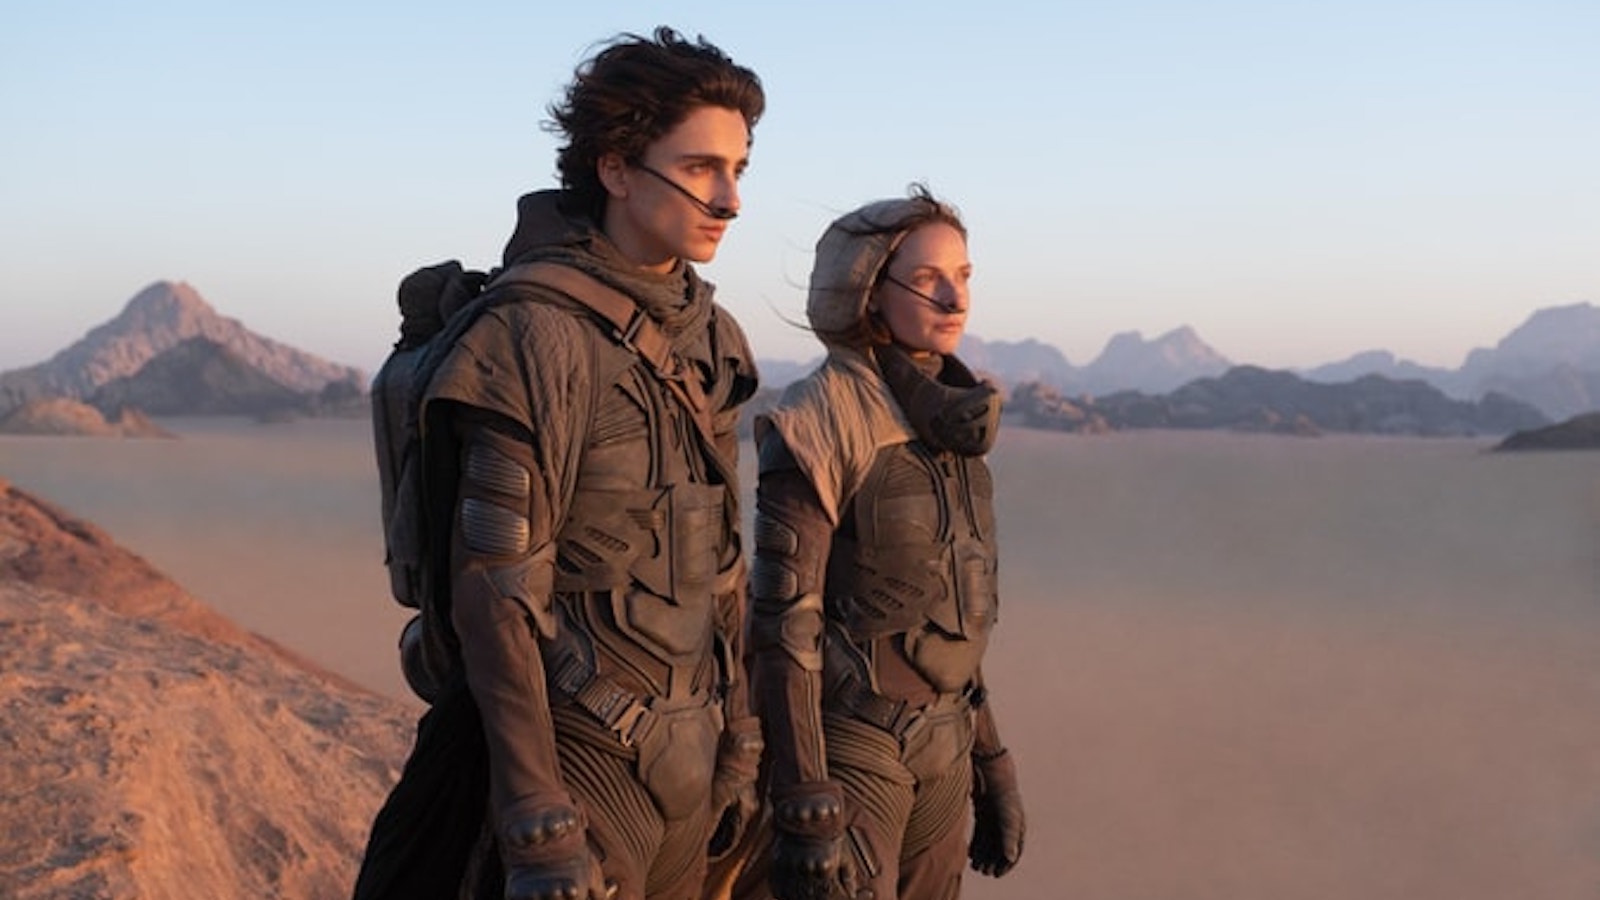 Dune protagonists look out over the desert.